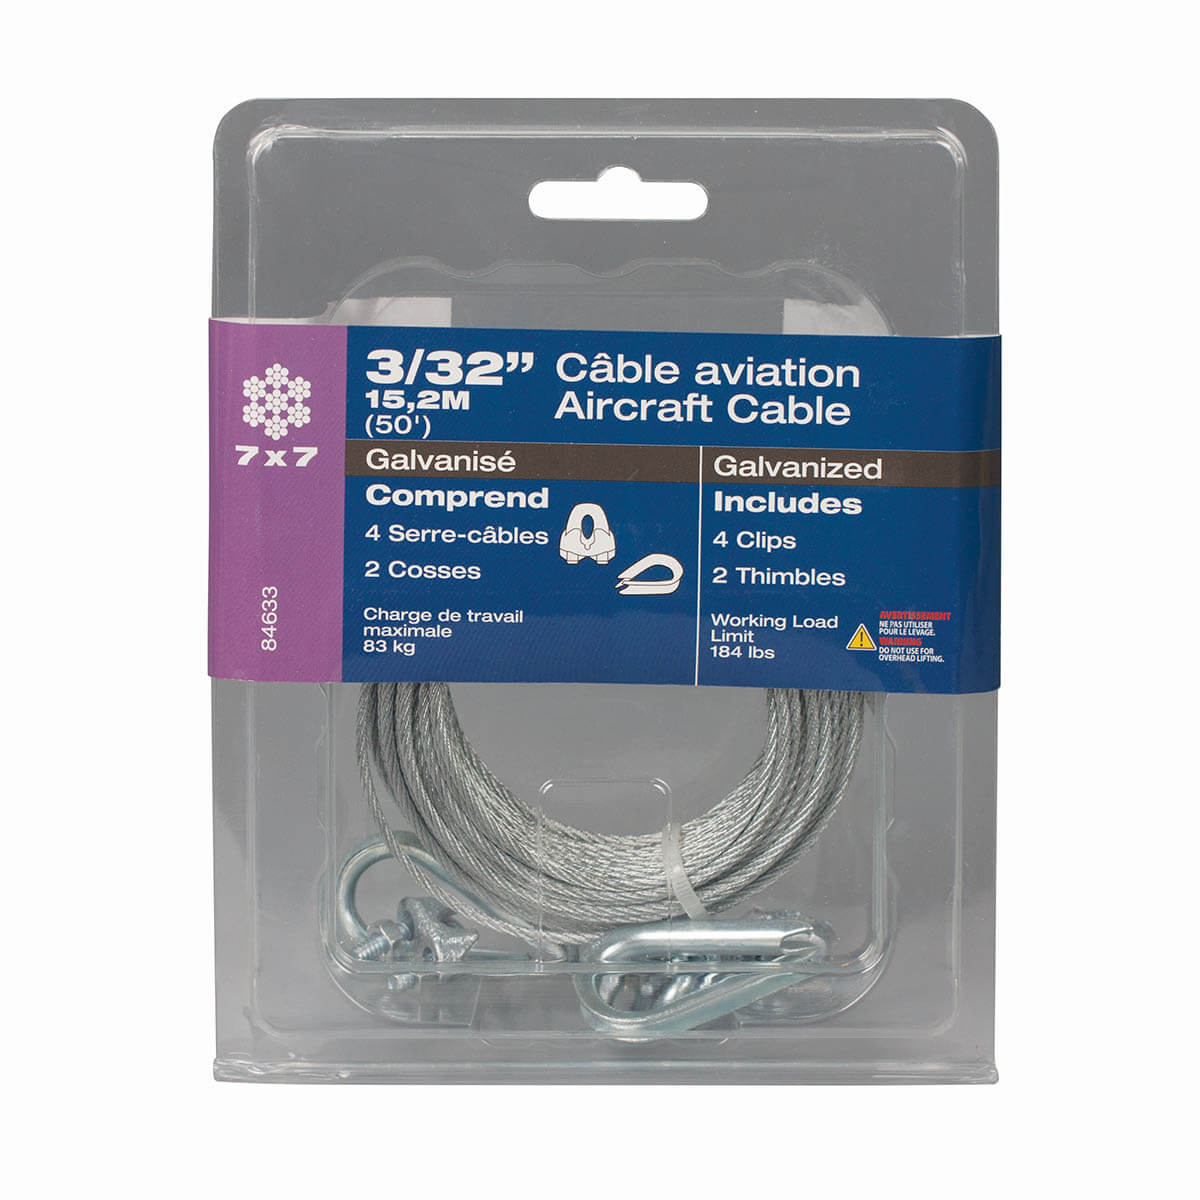 Galvanized Cable Kit